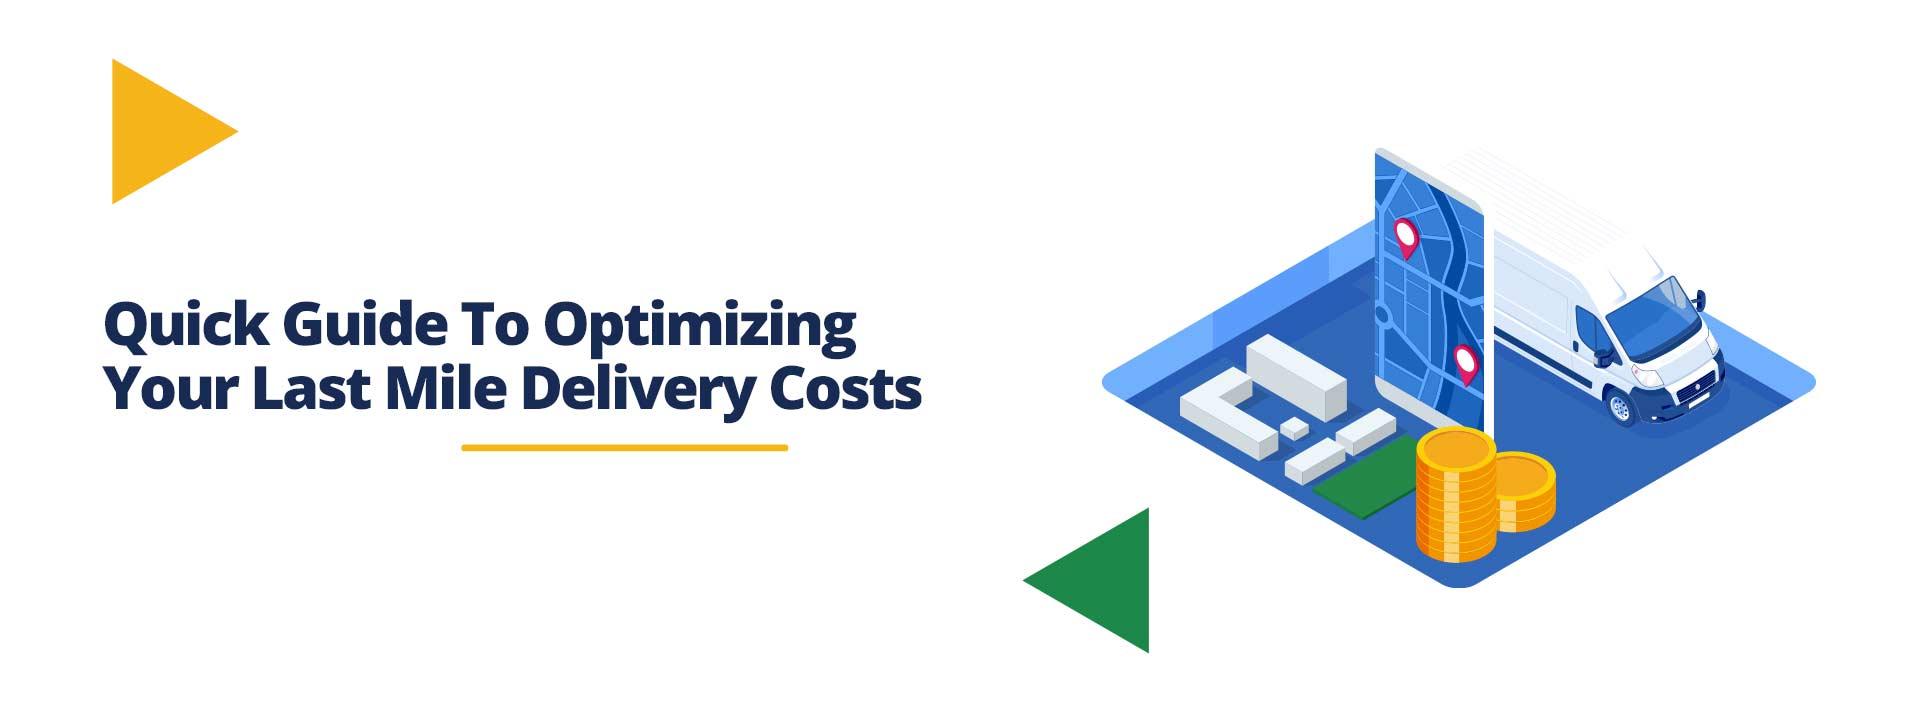 Quick Guide To Optimizing Your Last Mile Delivery Costs